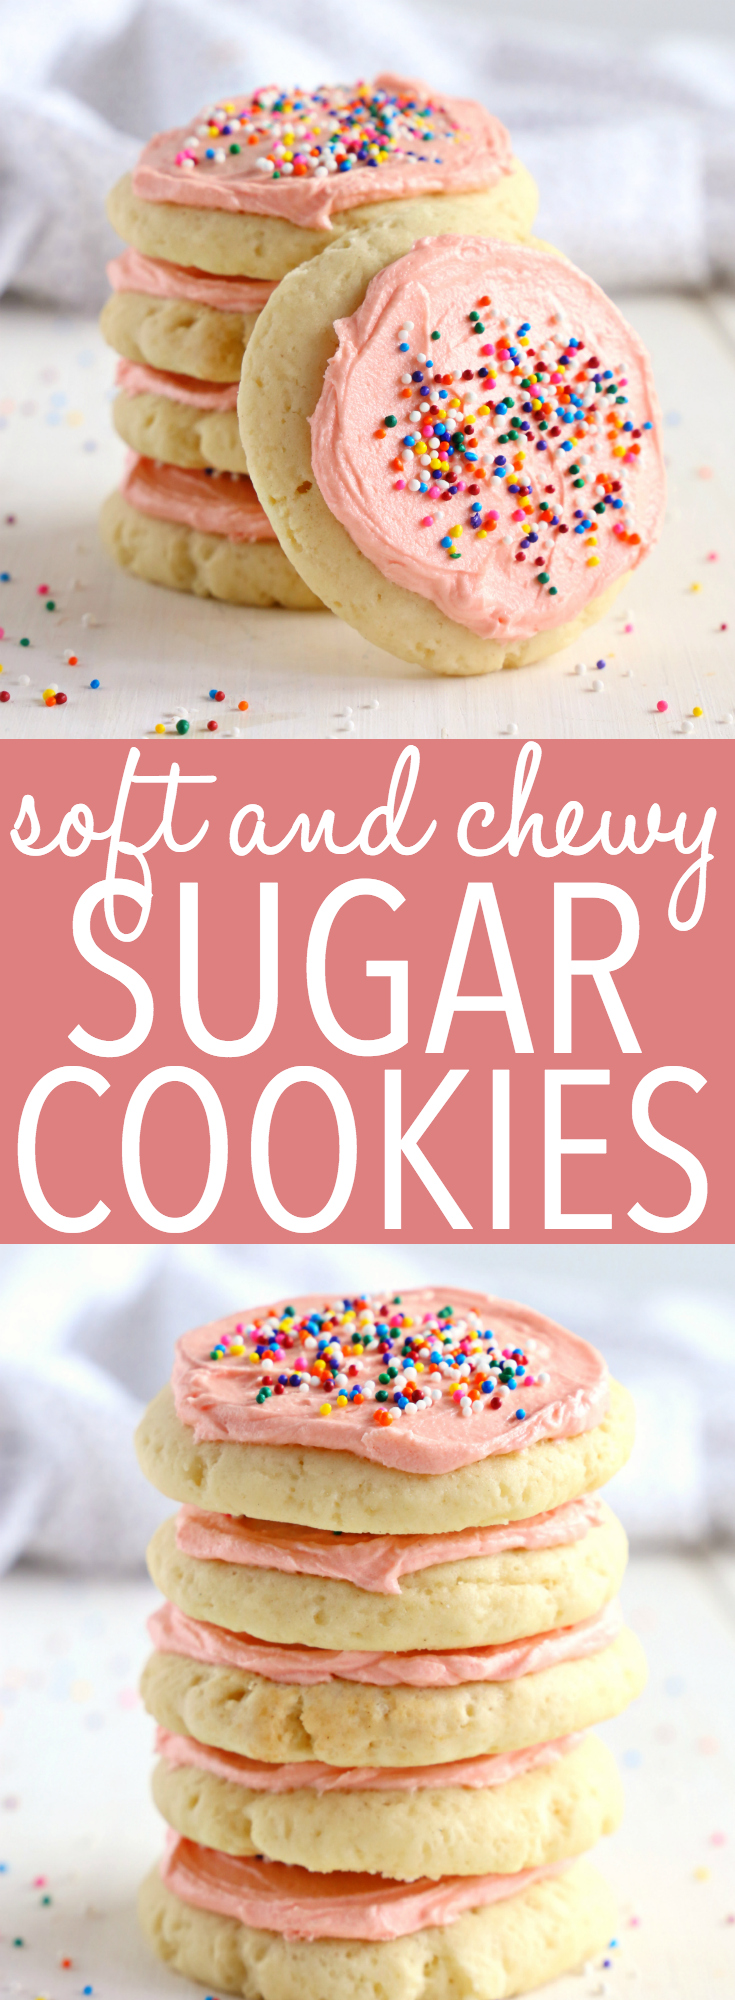 These Soft and Chewy Frosted Sugar Cookies are the perfect sweet treat that's easy to make and tastes just like your favourite Lofthouse sugar cookies! Recipe from thebusybaker.ca! #lofthousecopycat #copycatrecipe #sugarcookies #sweets #frostedcookies #soft #chewy #homemade #holiday #Christmas #dessert #pink #birthday #swig #cookies #cookie #recipe #foodblog #easyrecipe #baking via @busybakerblog